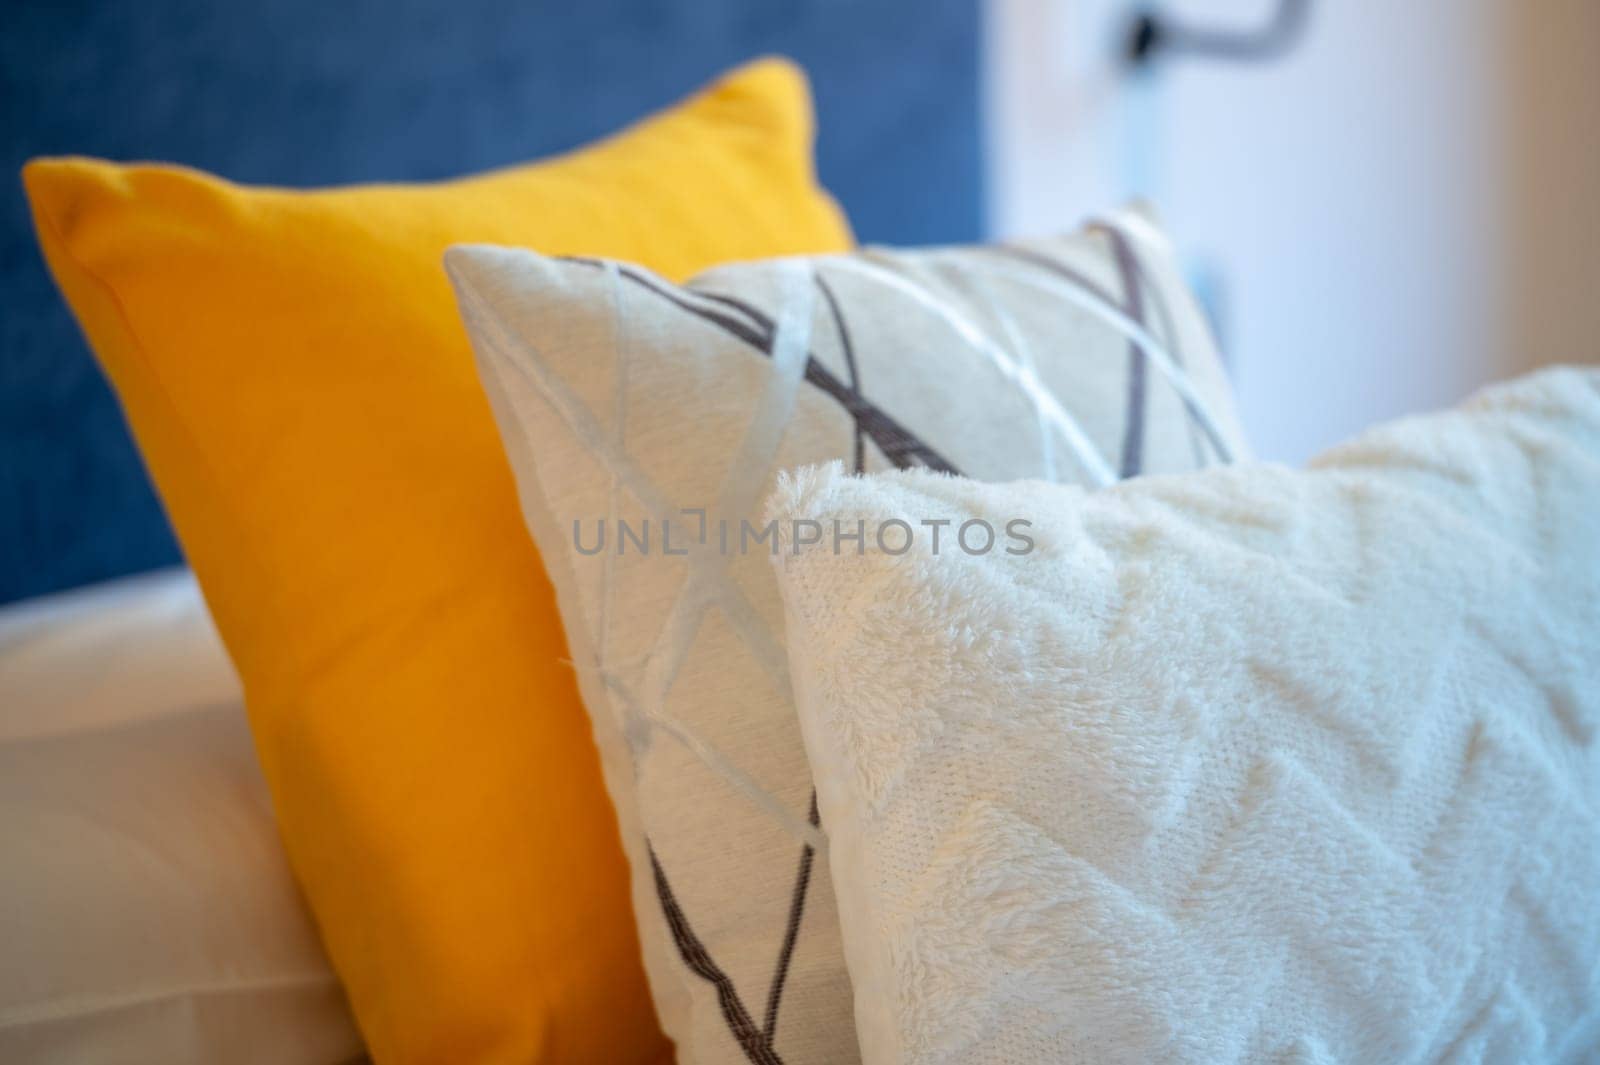 Colorful cushions on bed in illuminated room. by martinscphoto